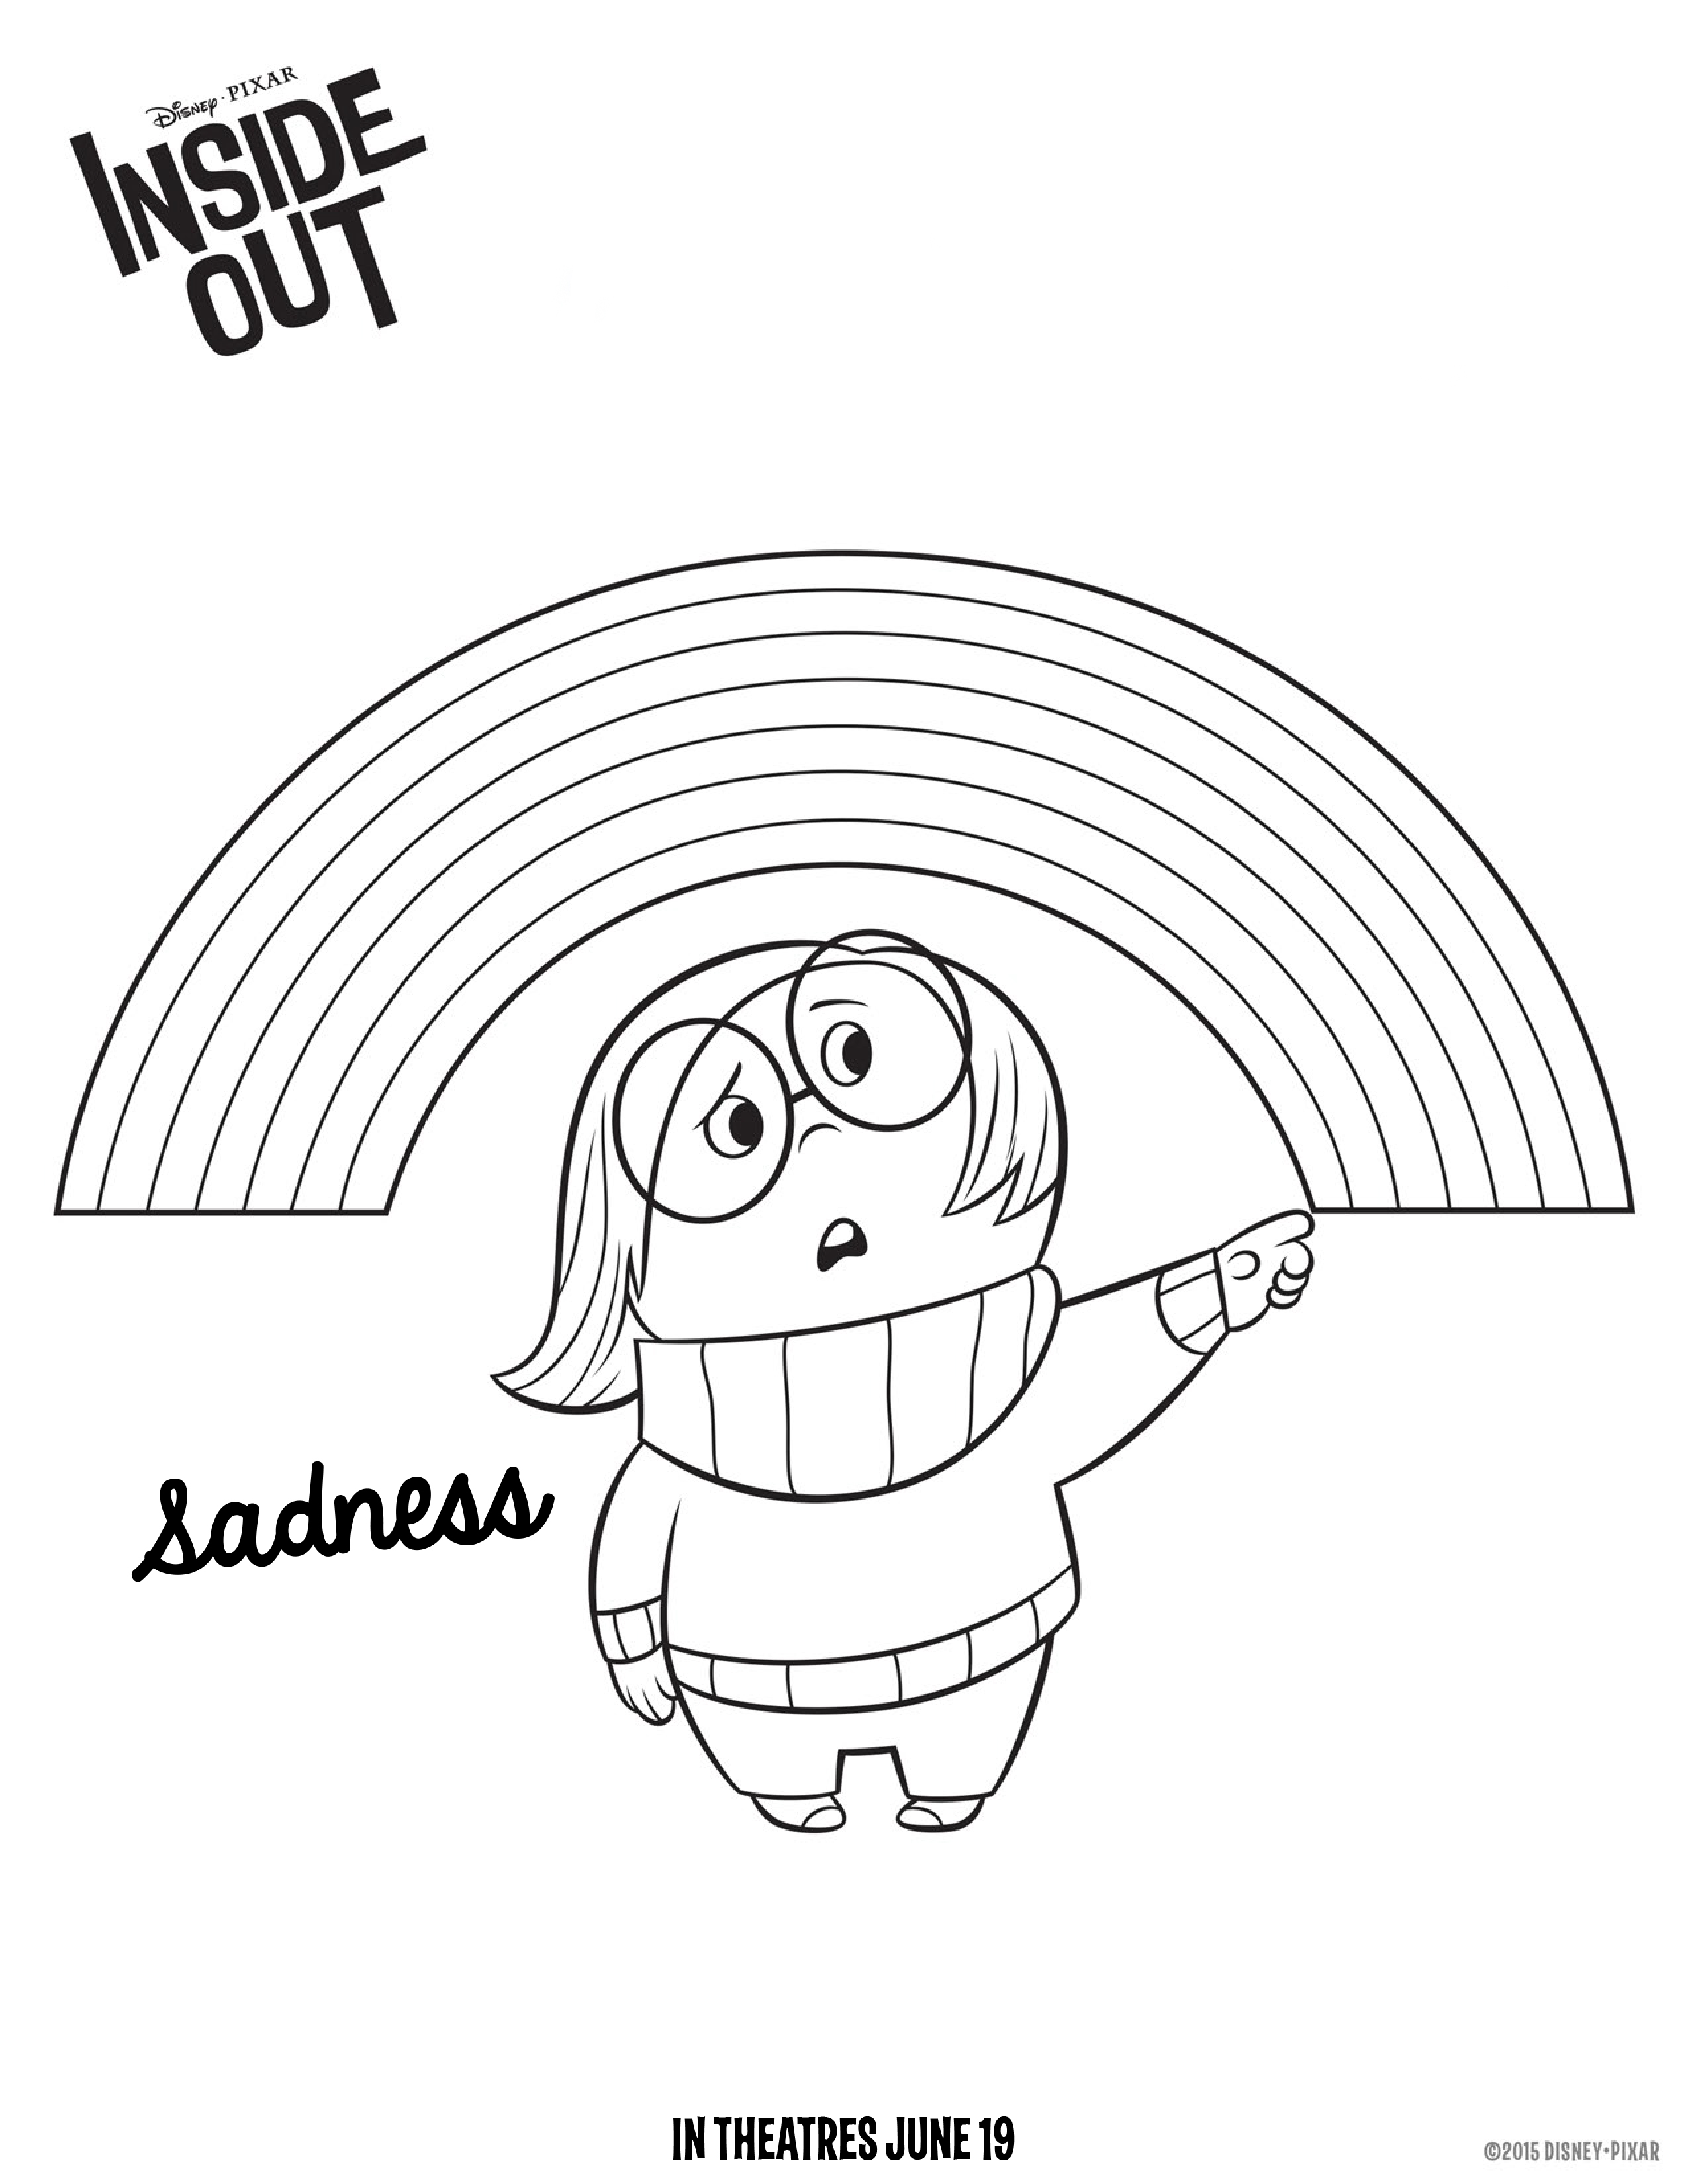 Free Printable Inside Out Coloring Pages - Printable Templates